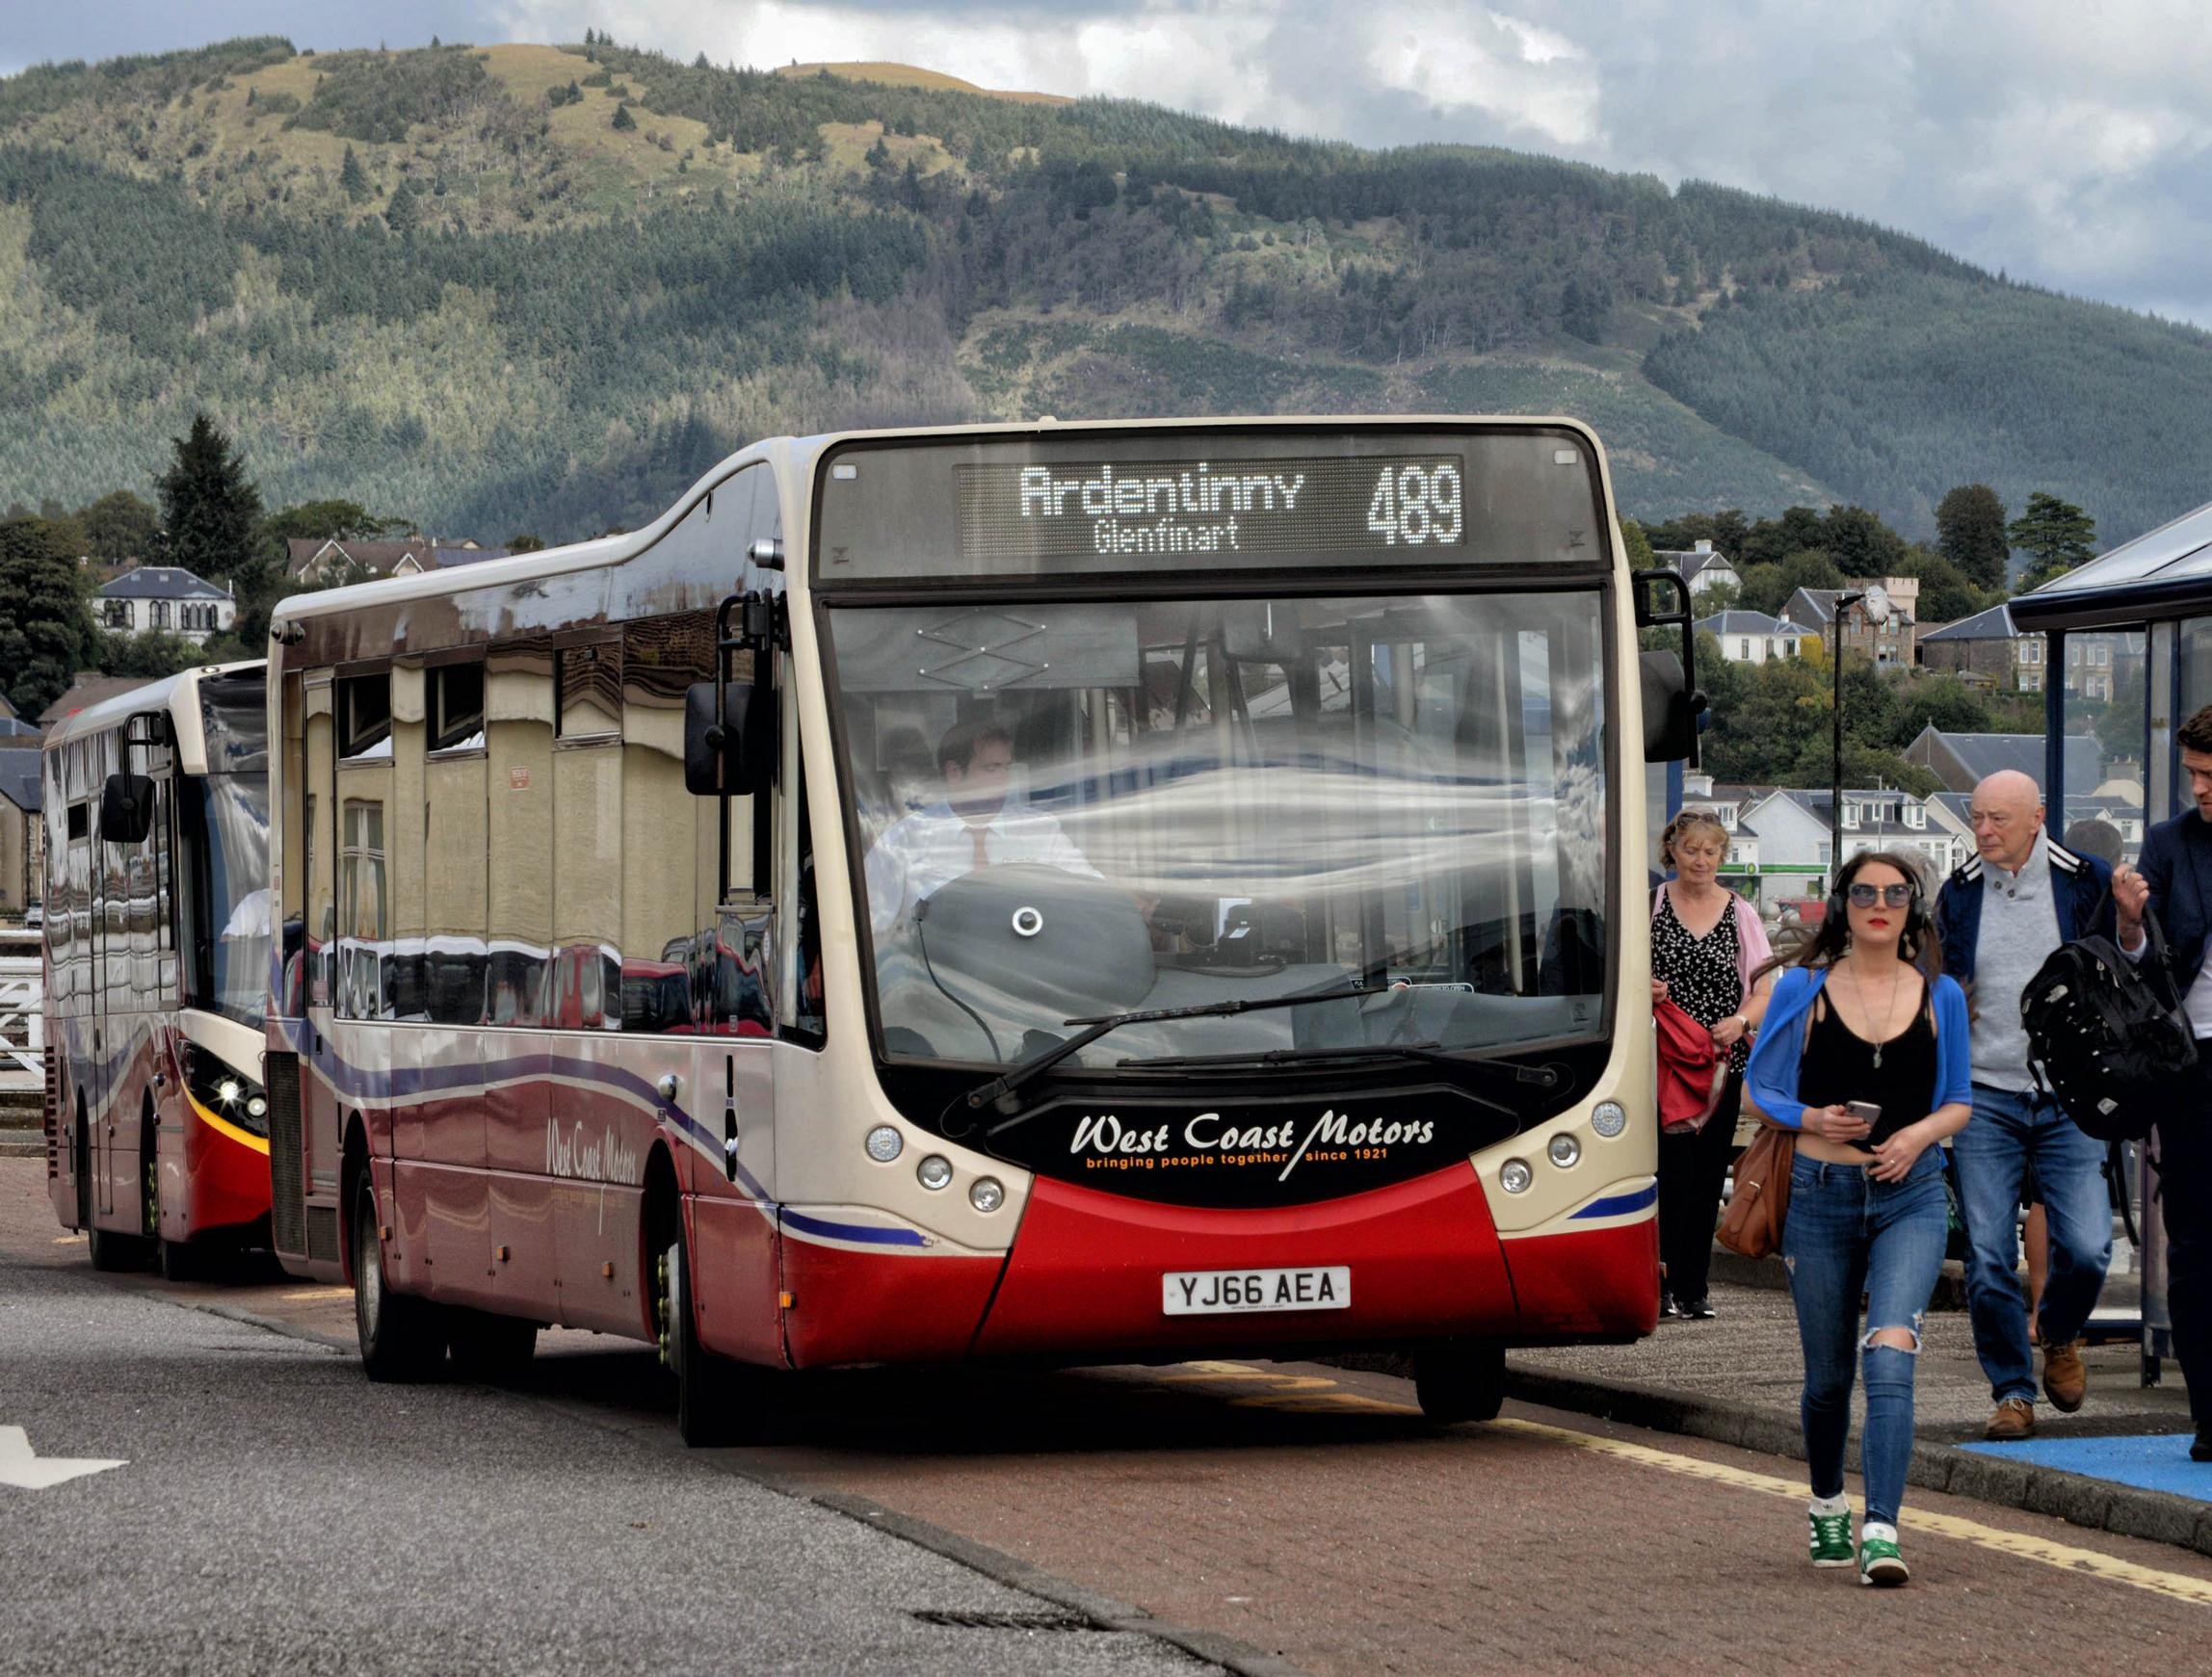 A bus service in Dunoon, Argyll and Bute